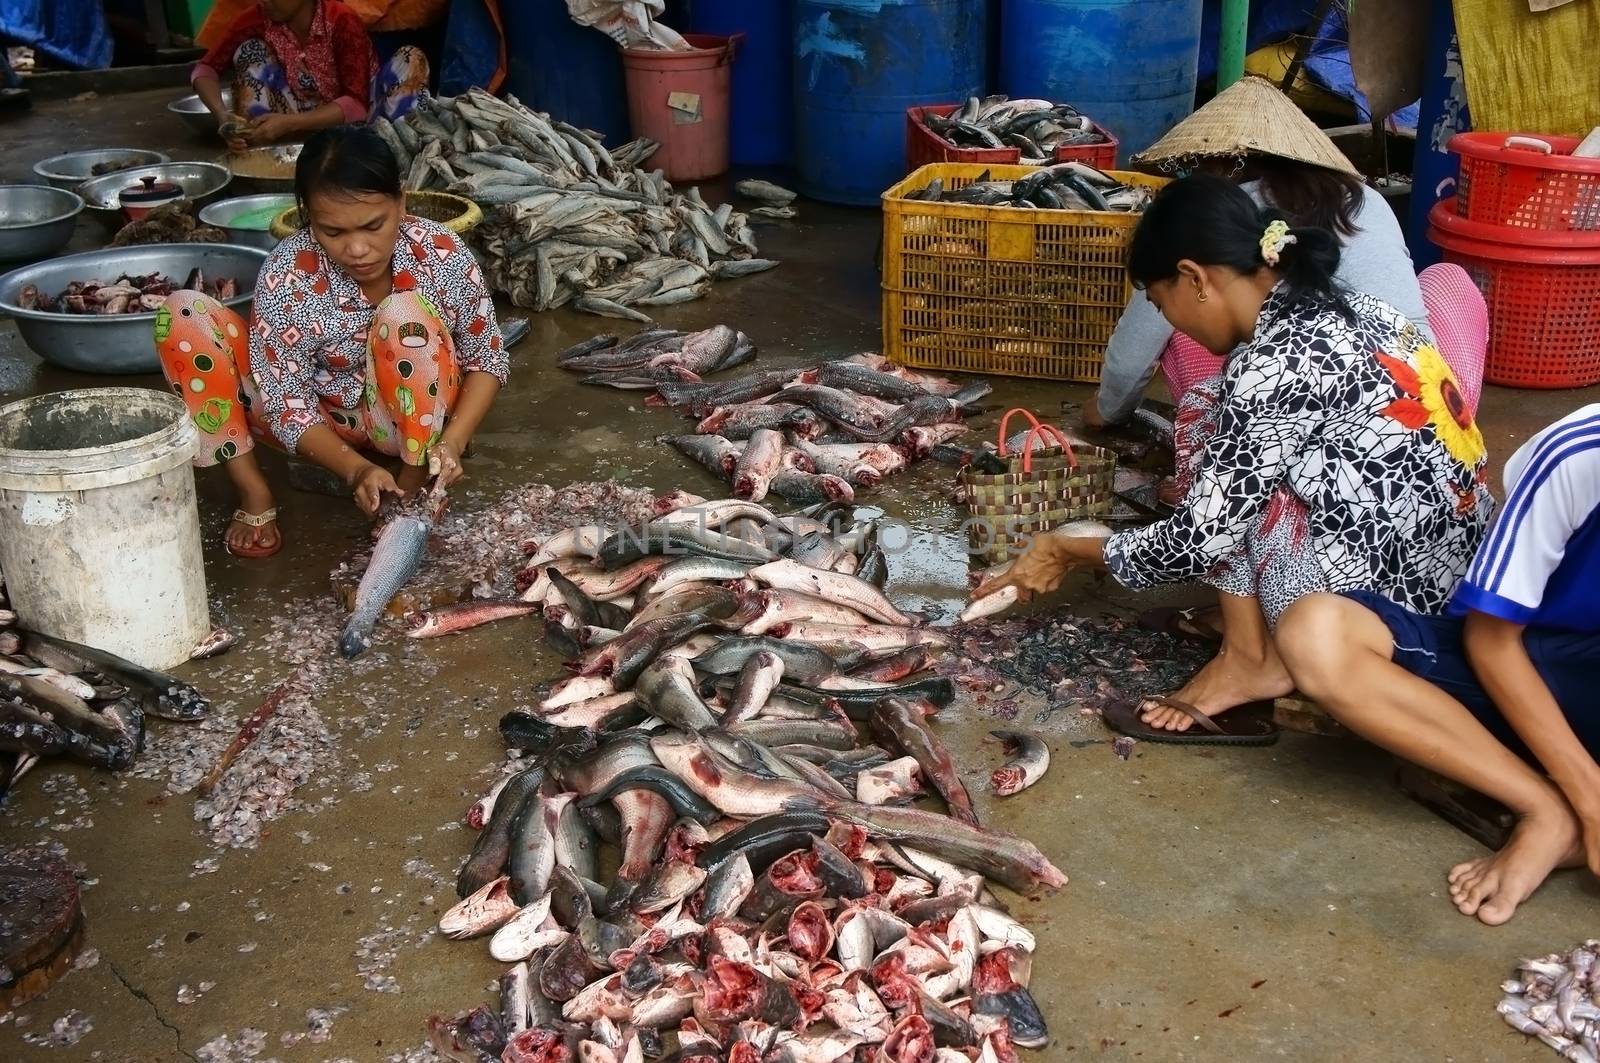 DONG THAP, VIET NAM- NOV 15: Group of people squat ,do fish preparation, fish in pile on cement floor, they scale and cut fish to prepare for shrimp processing in Dong Thap, Viet Nam on Nov 15, 2013